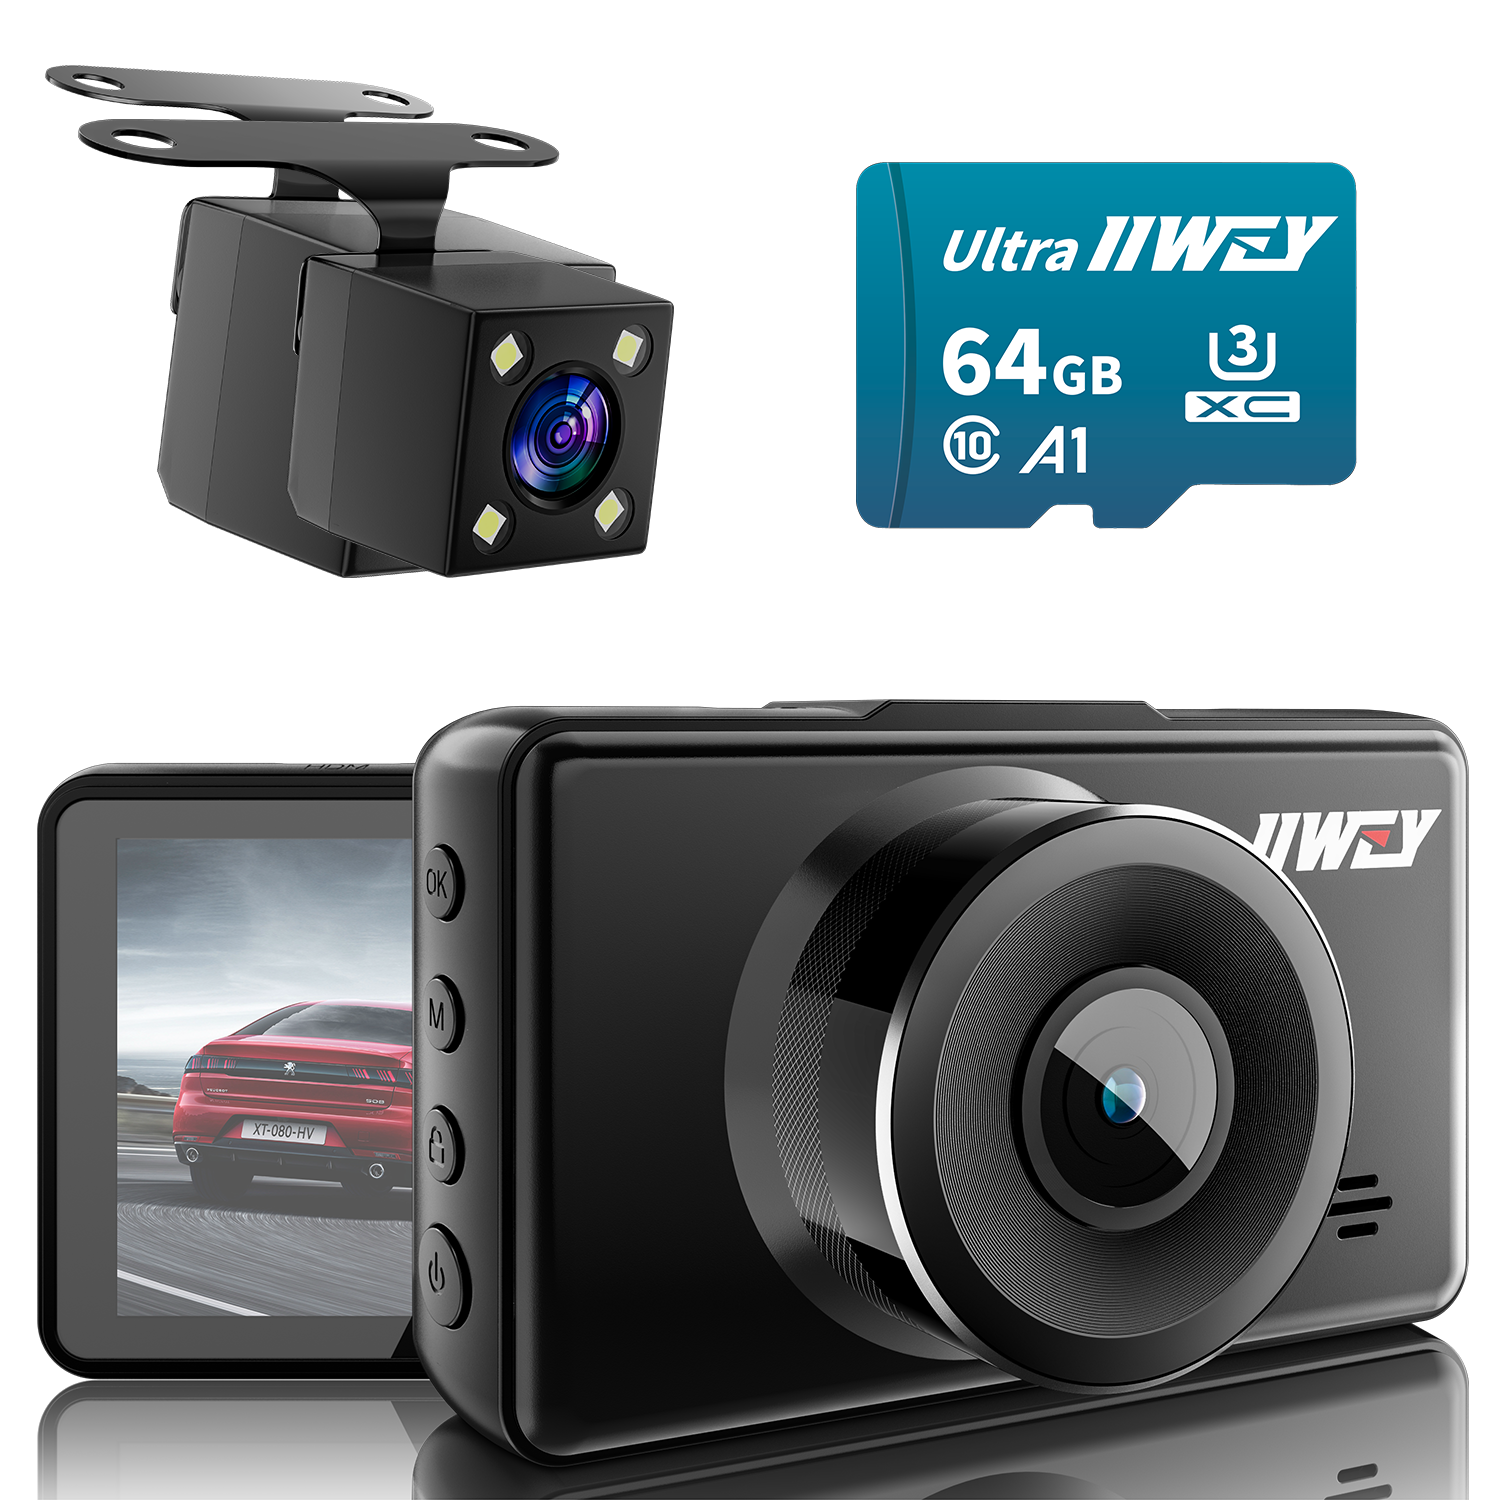 Dash Cam Front and Rear Camera FHD 1080P with Night Vision SD Card Included, 3 Inch IPS Screen Dash Cam for Car, 170° Wide Angle Dashboard Camera Motion Detection Parking Monitor G-Sensor